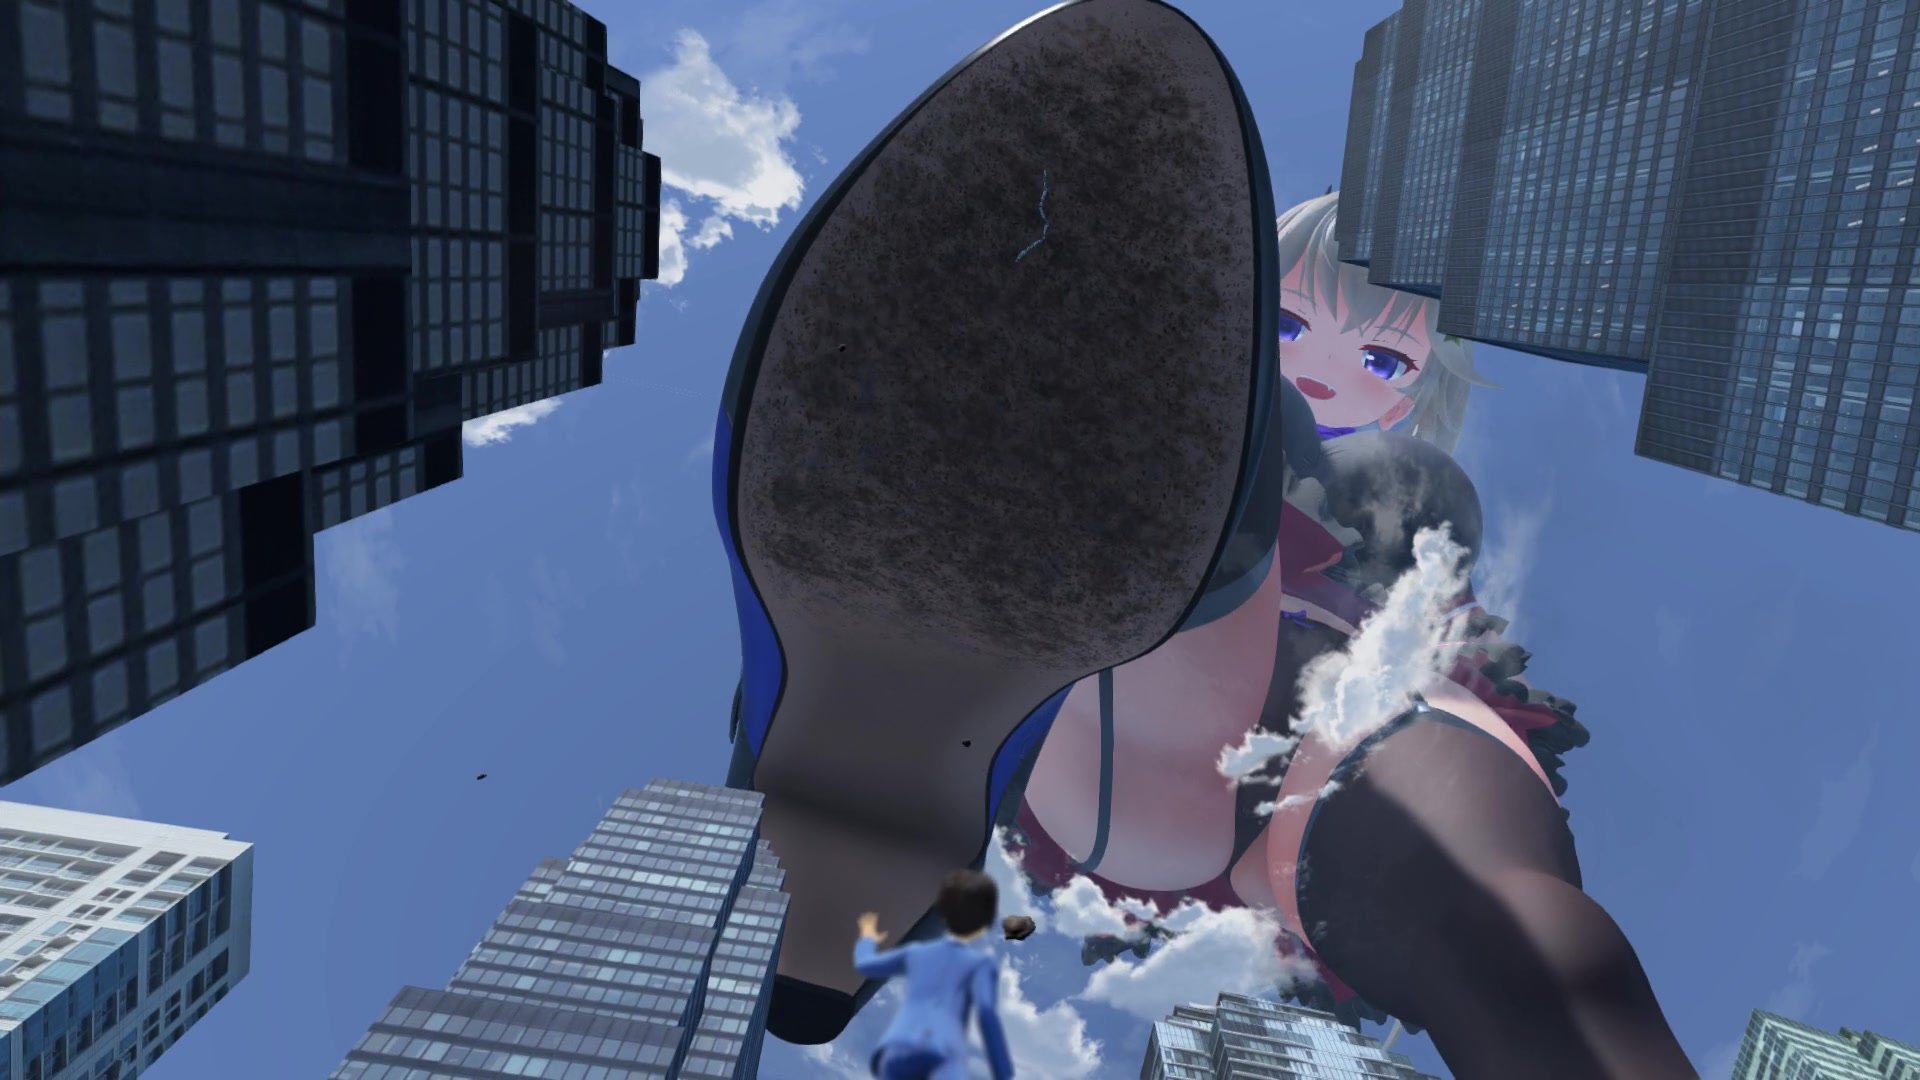 ... giantess grows in the city